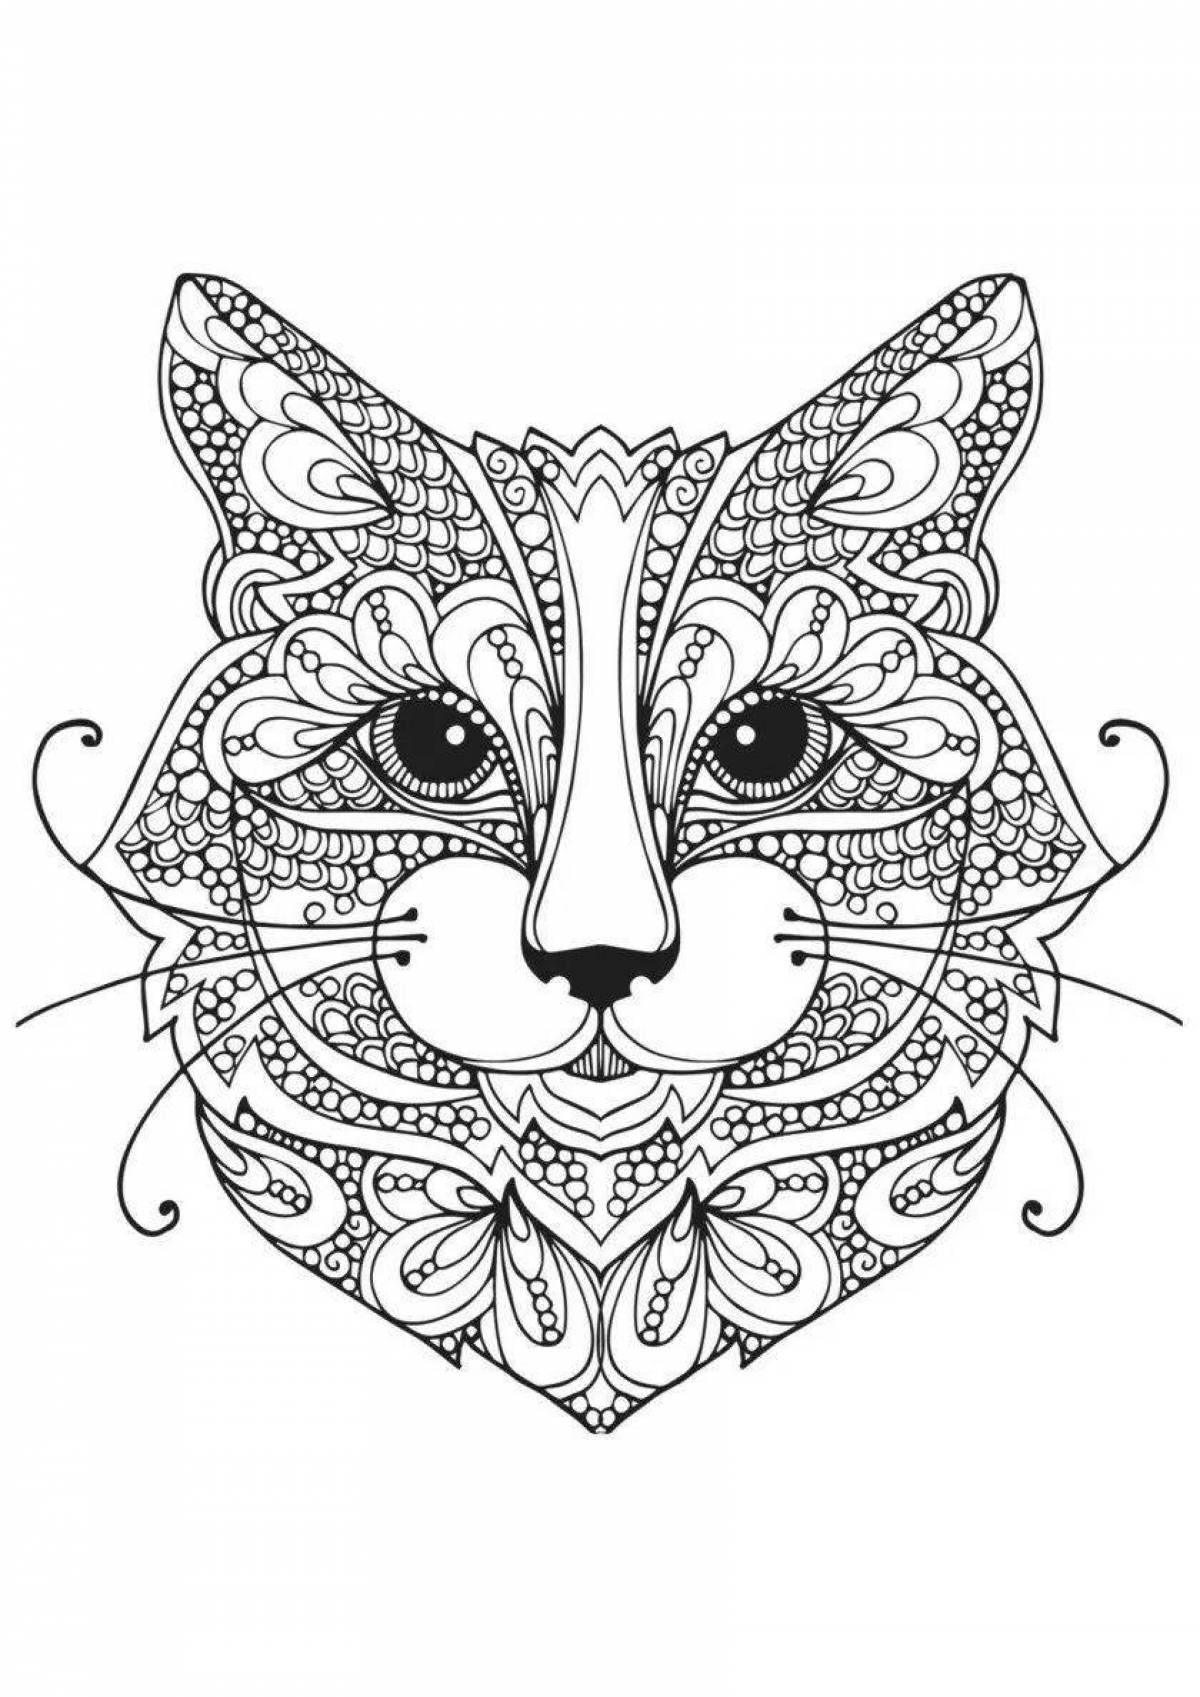 Grand coloring page complex cats